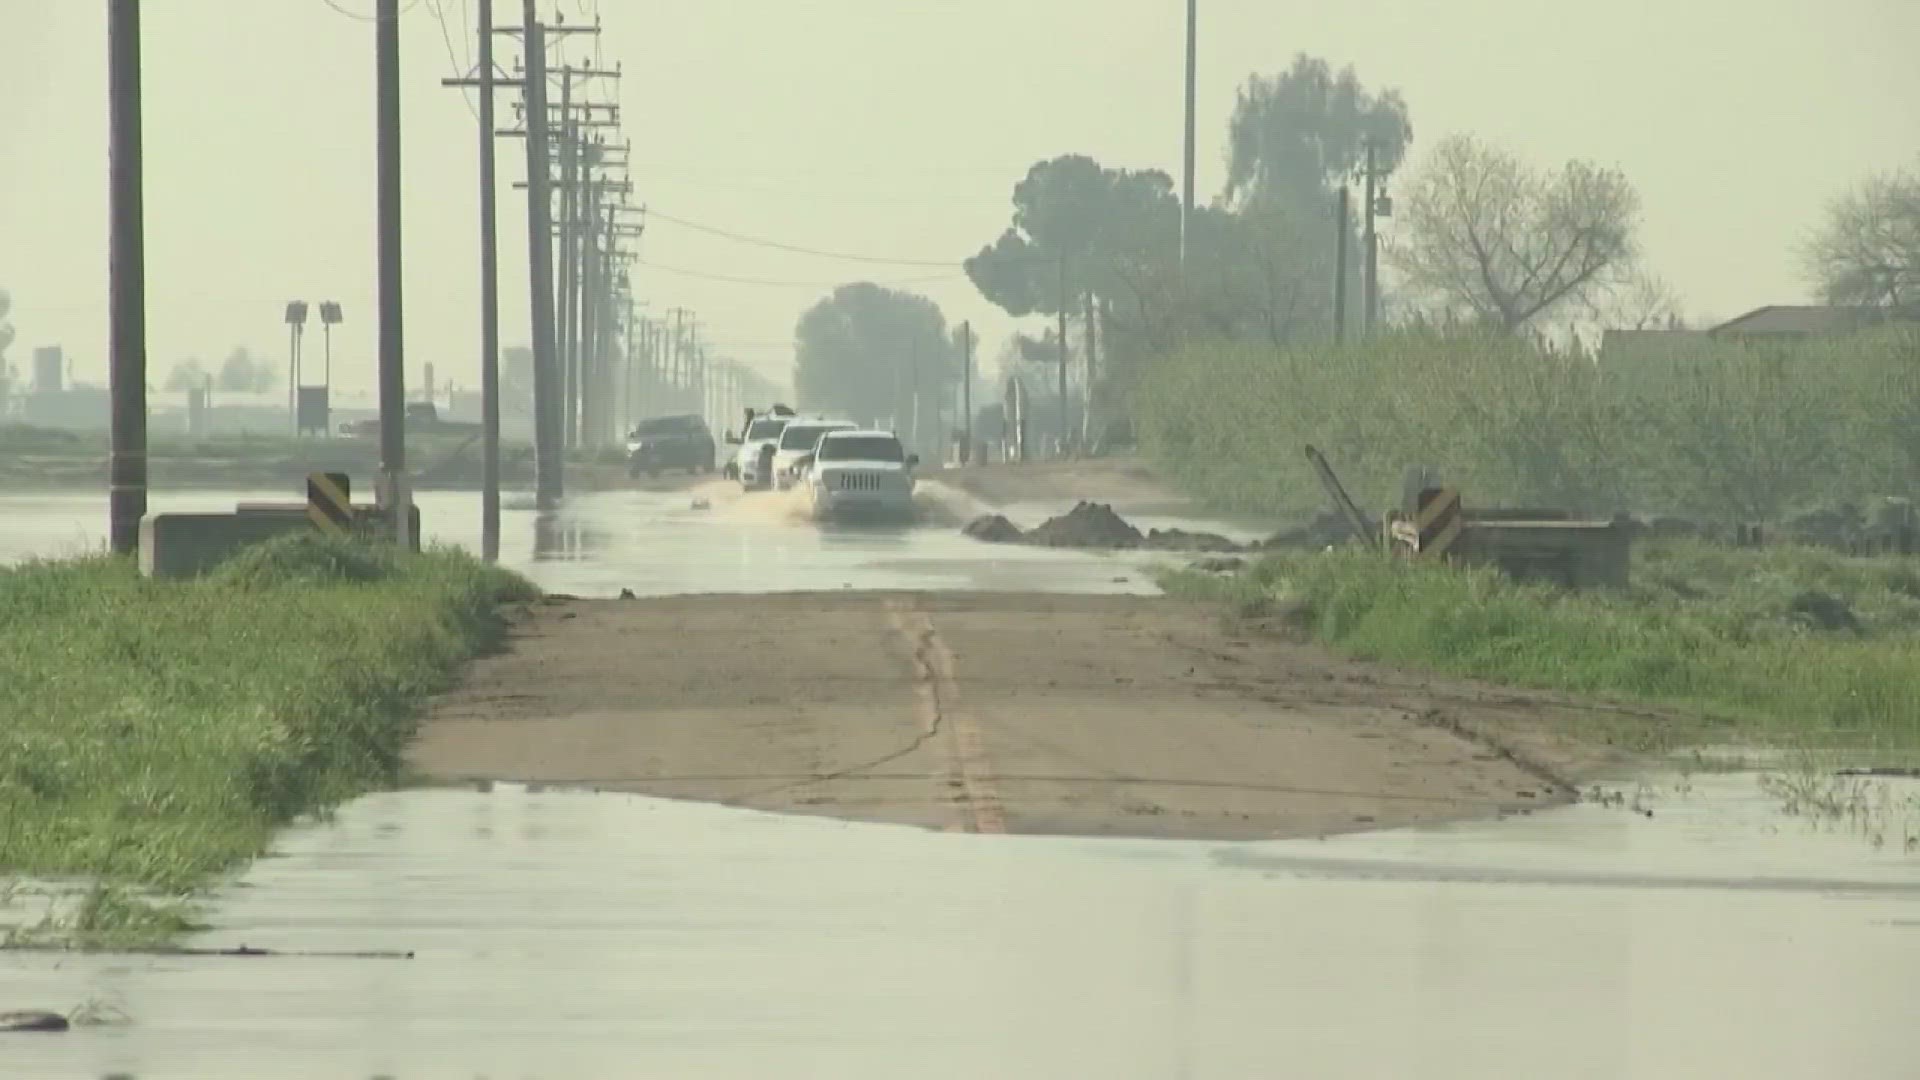 California is dealing with flooding in the aftermath of winter storms and bracing for the next round of rain.